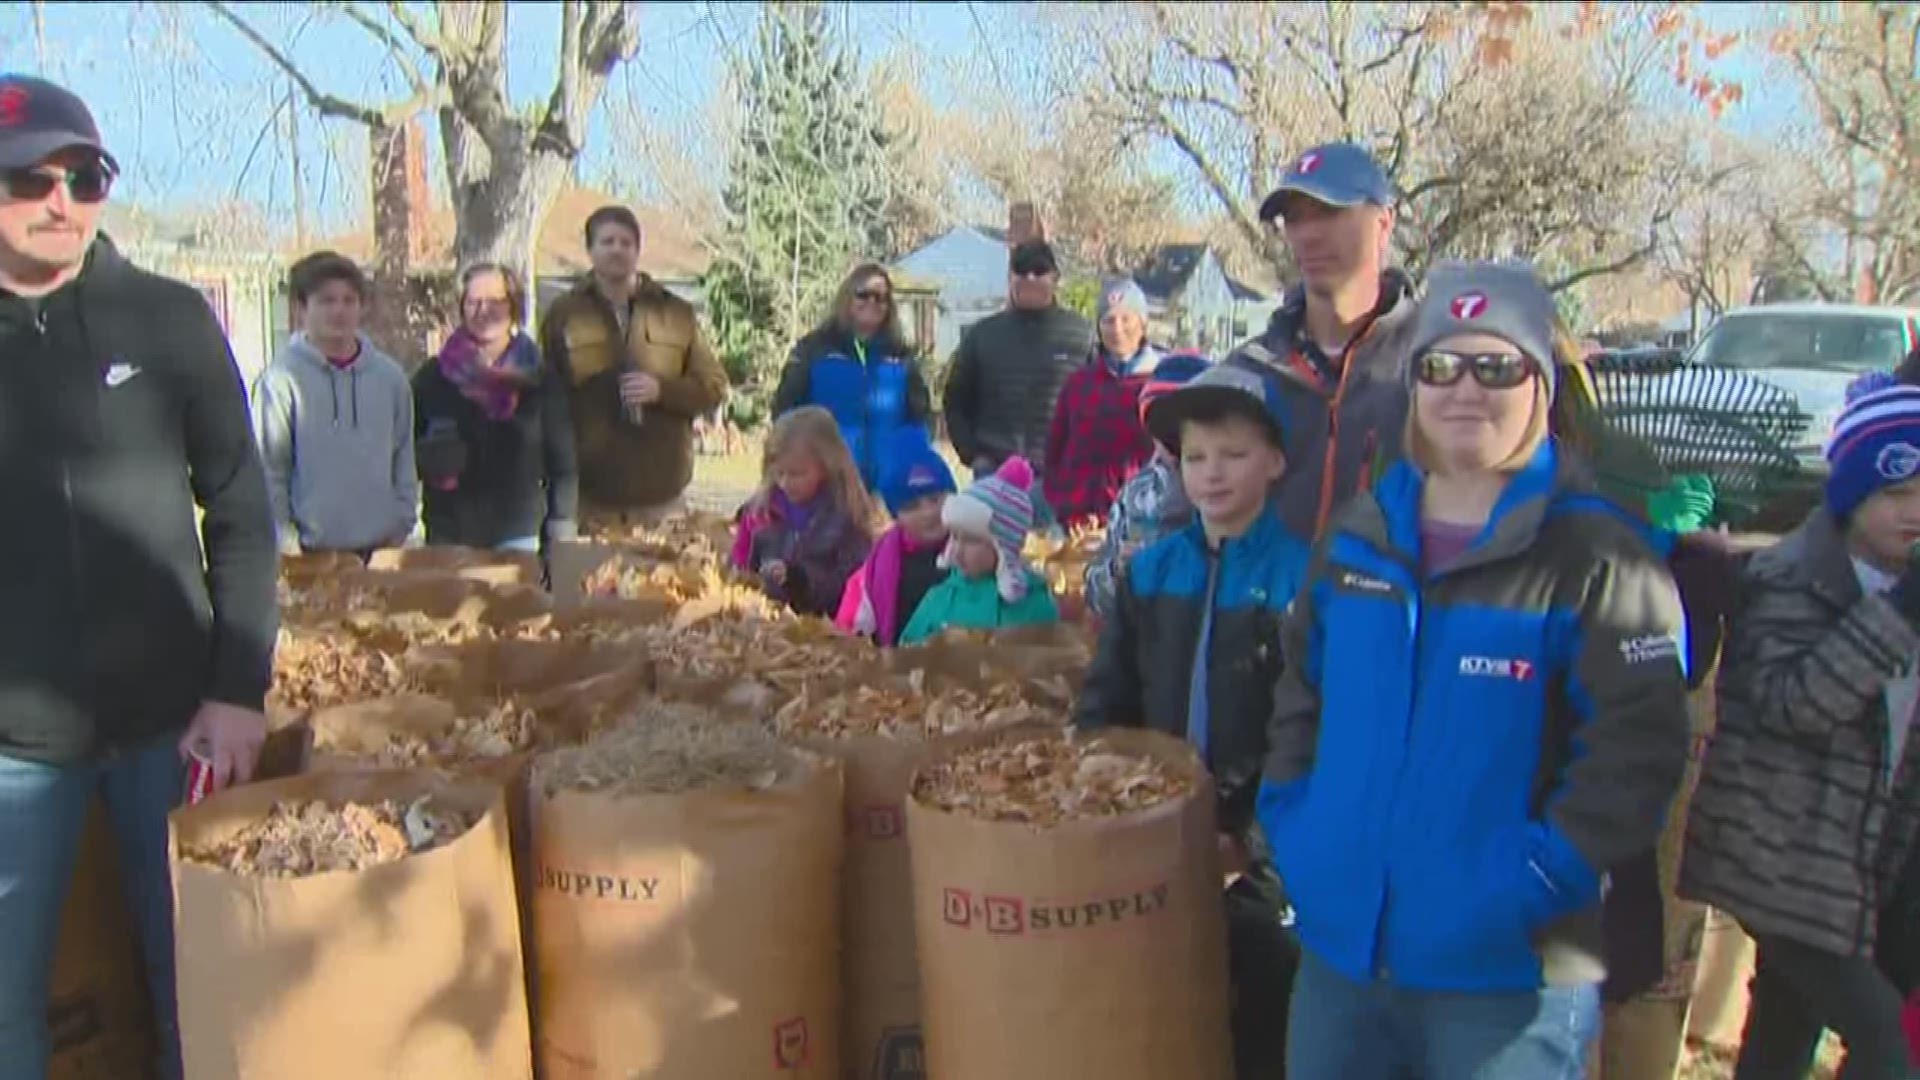 Over 7,000 volunteers came together to rake leaves around the Treasure Valley.